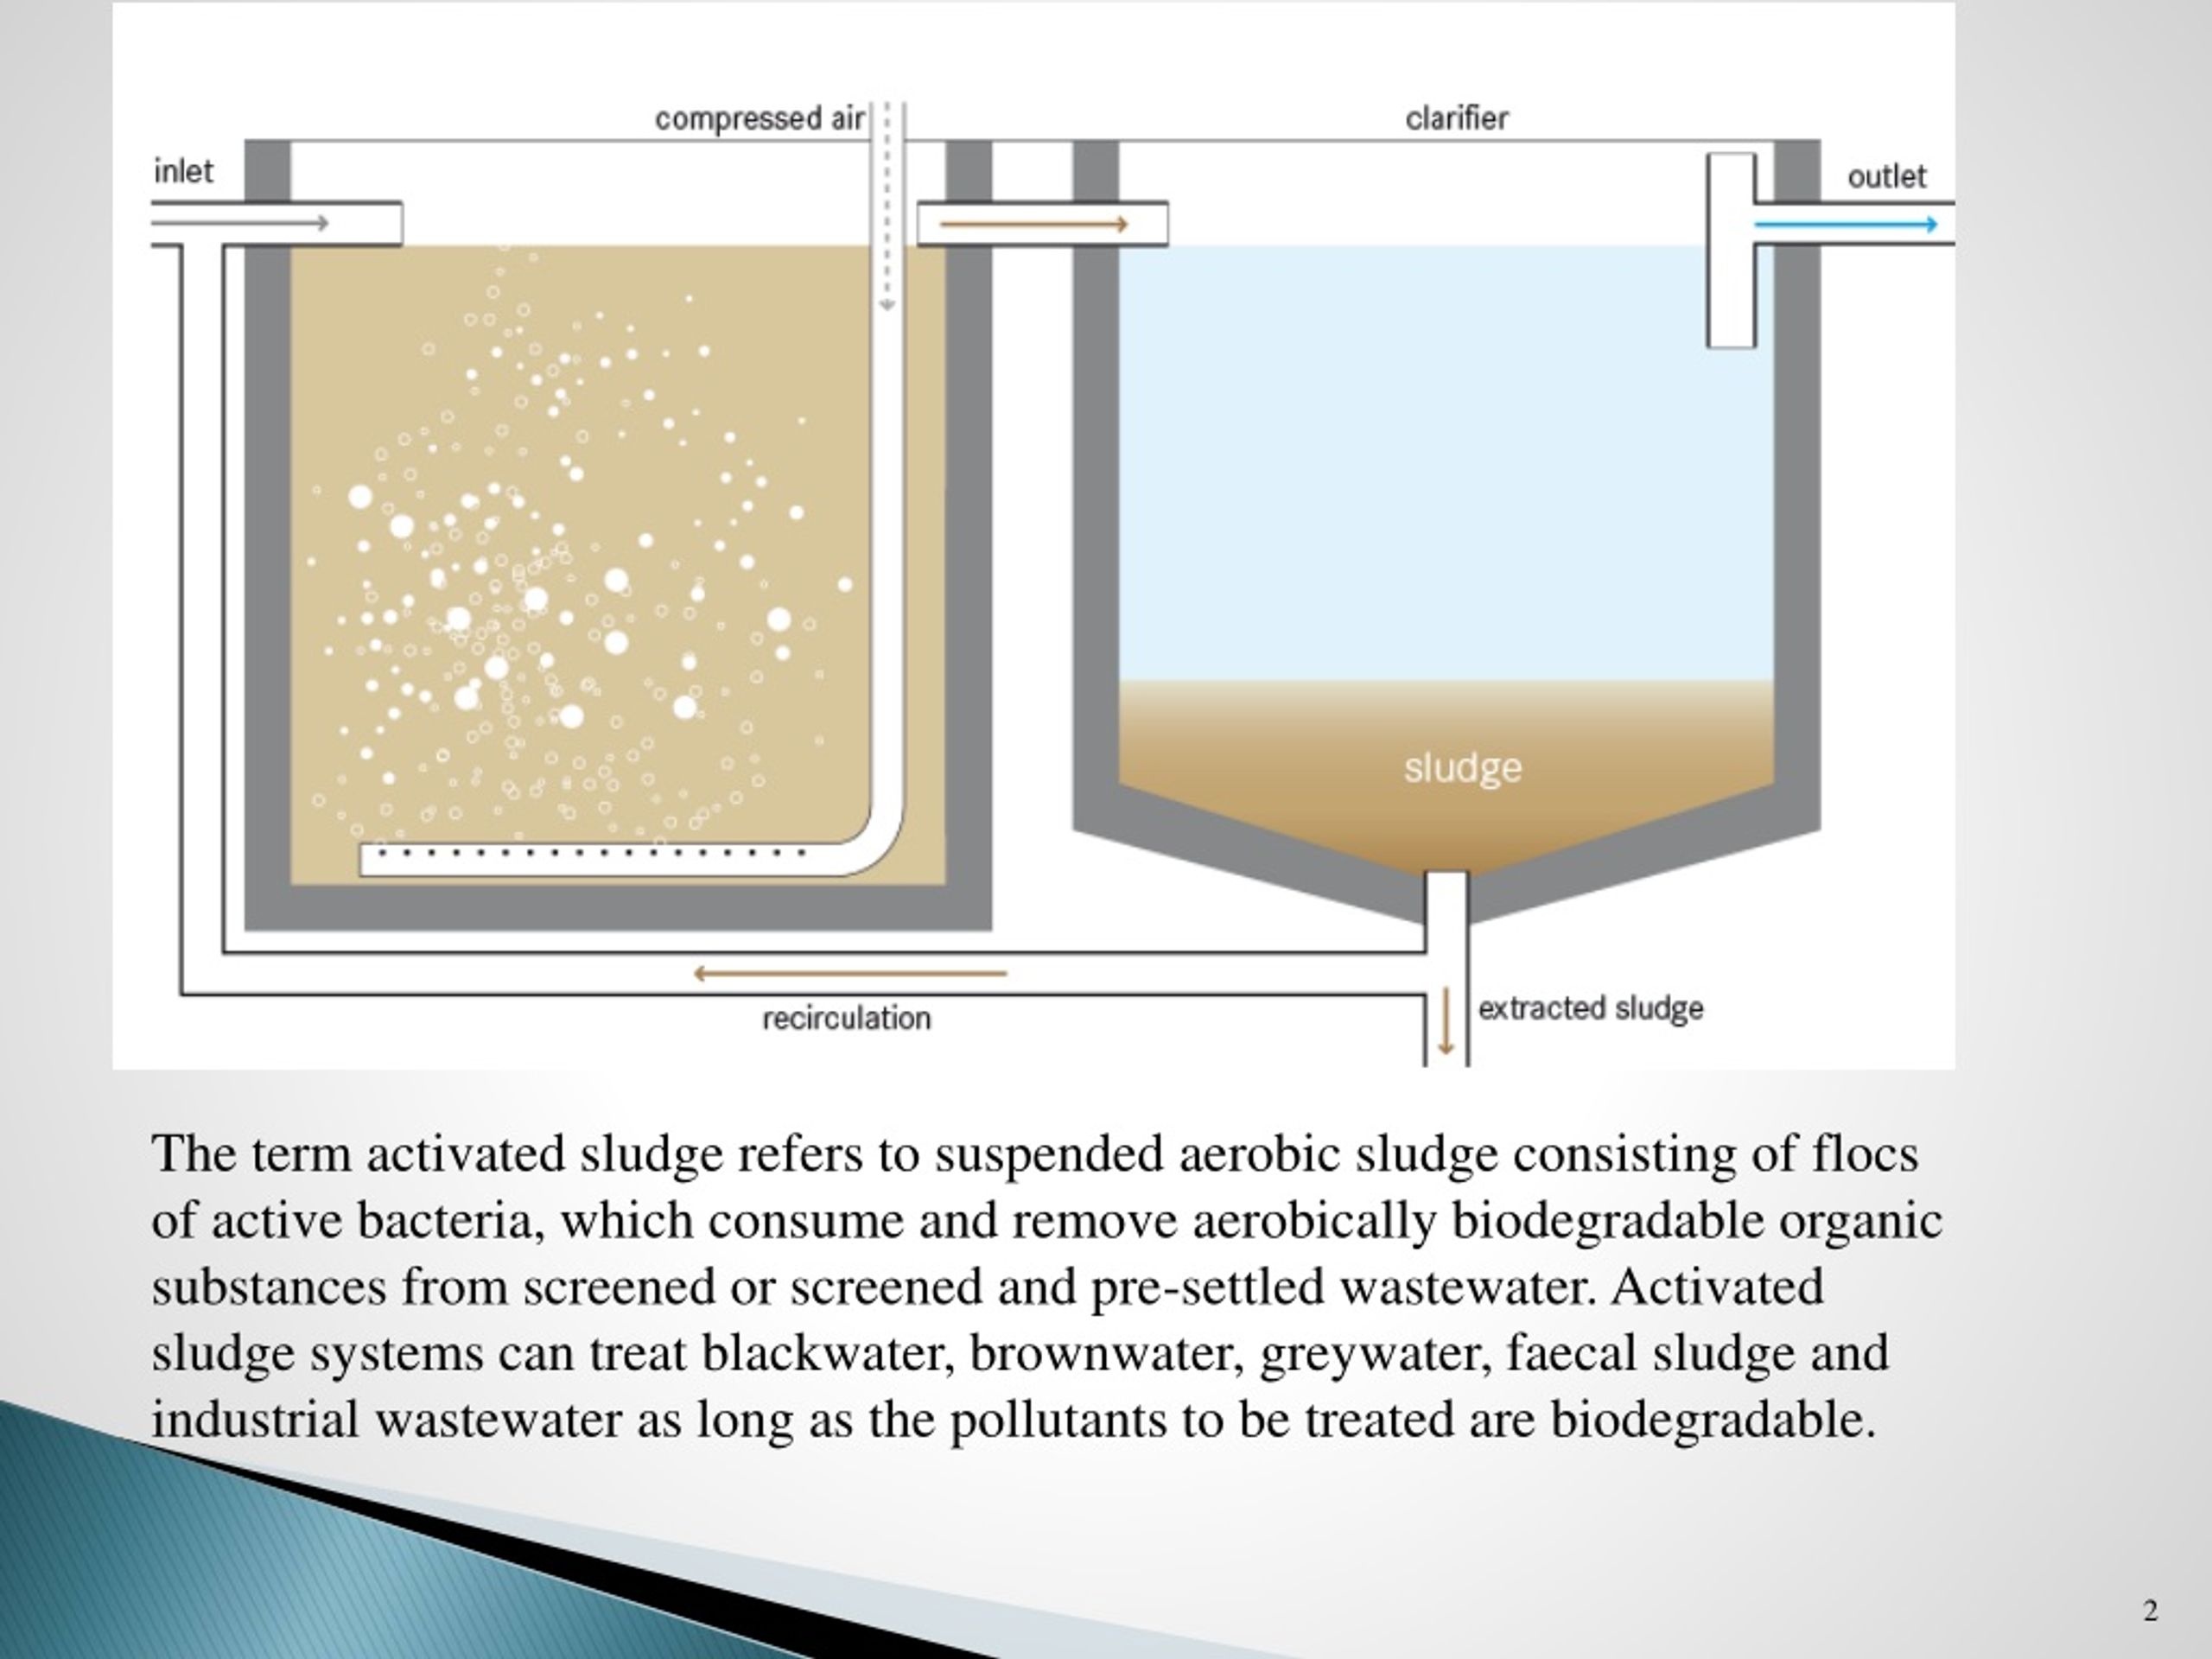 PPT - AEROBIC WASTEWATER TREATMENT PROCESSES ACTIVATED SLUDGE PROCESS ...